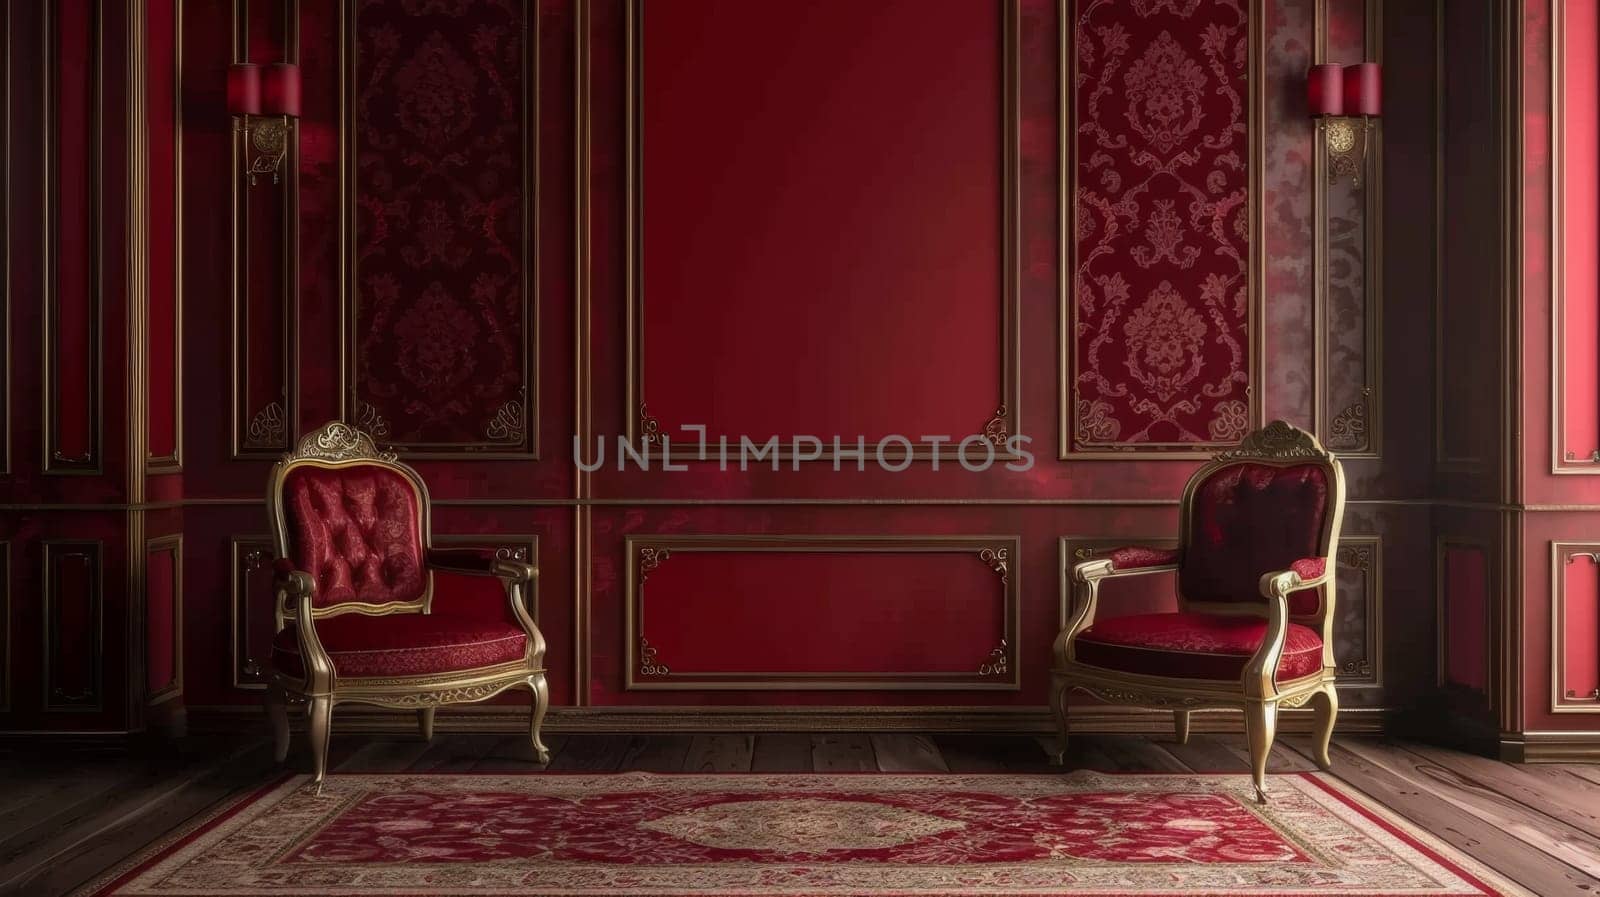 A room with red walls and a carpeted floor has two chairs